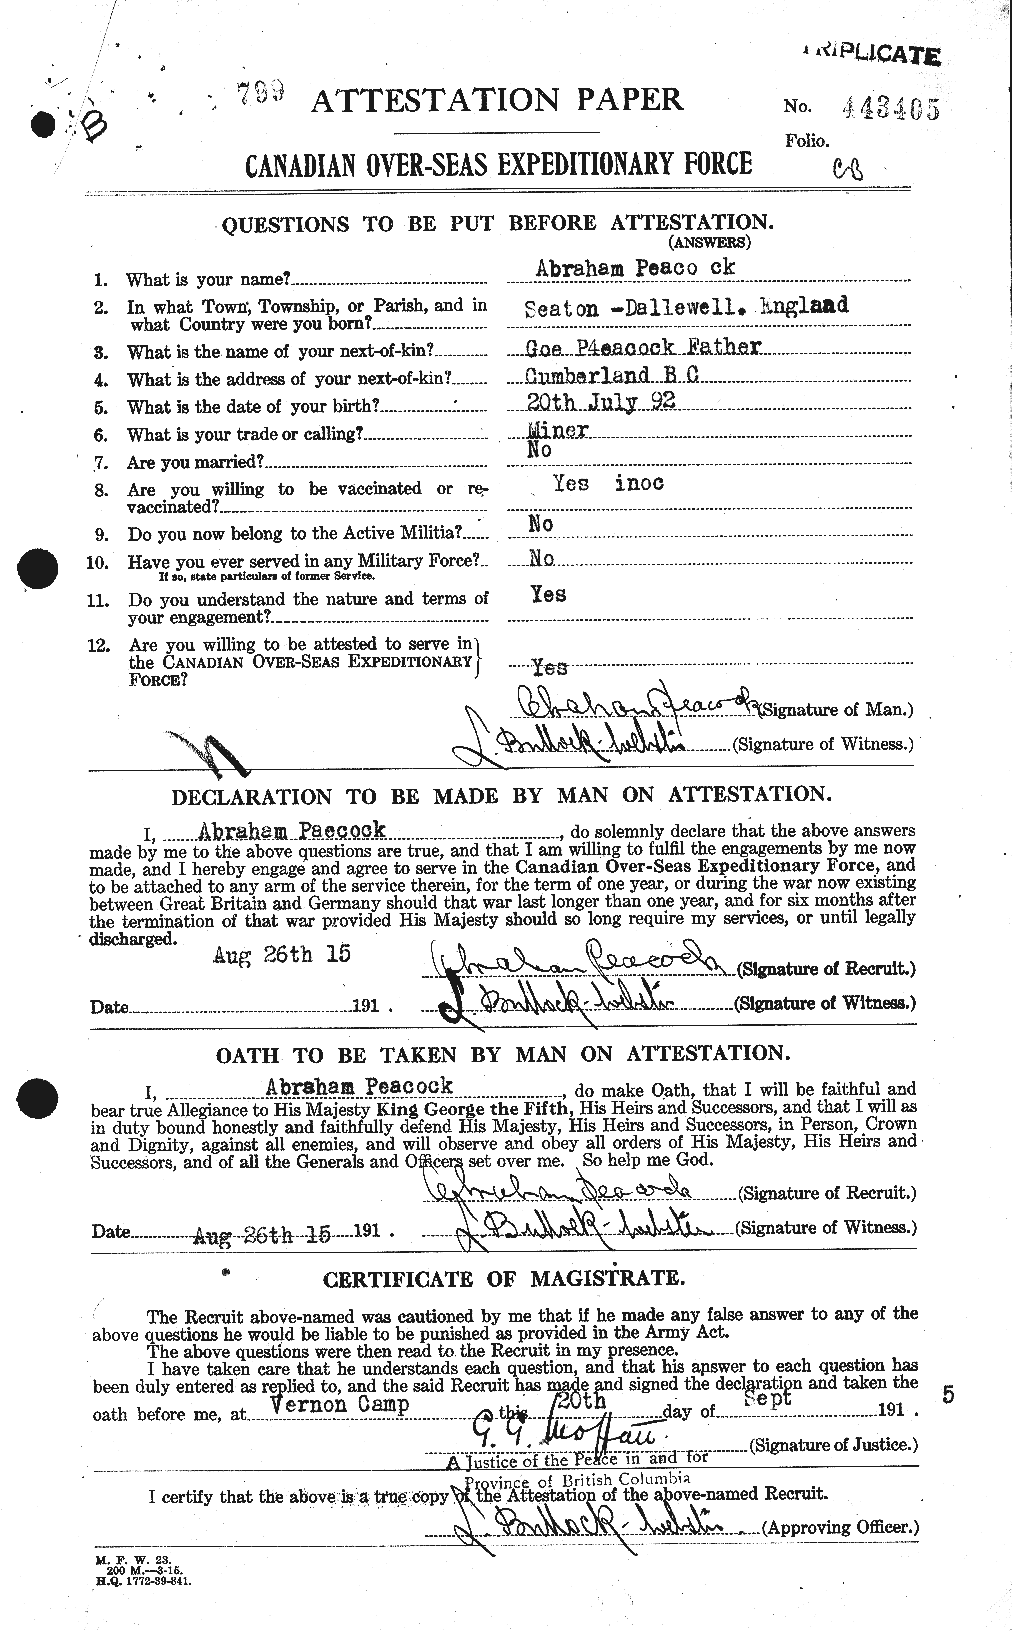 Personnel Records of the First World War - CEF 570318a